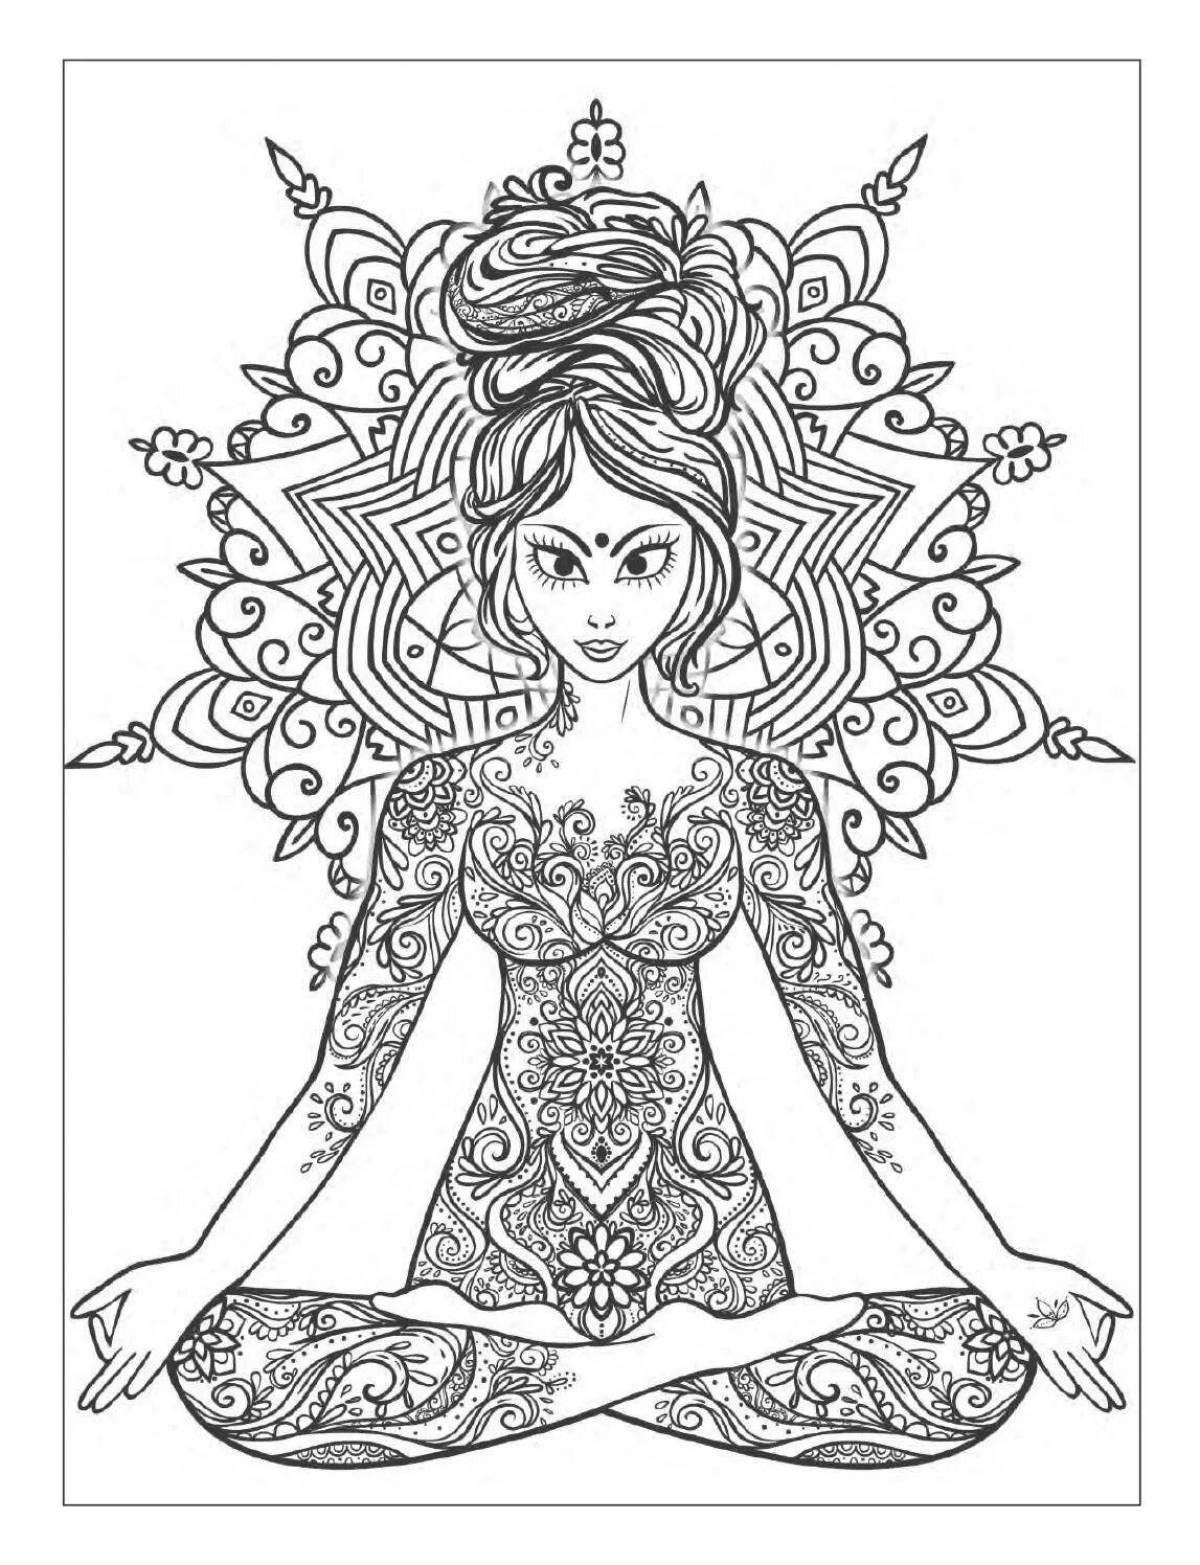 Radiant coloring page art yoga